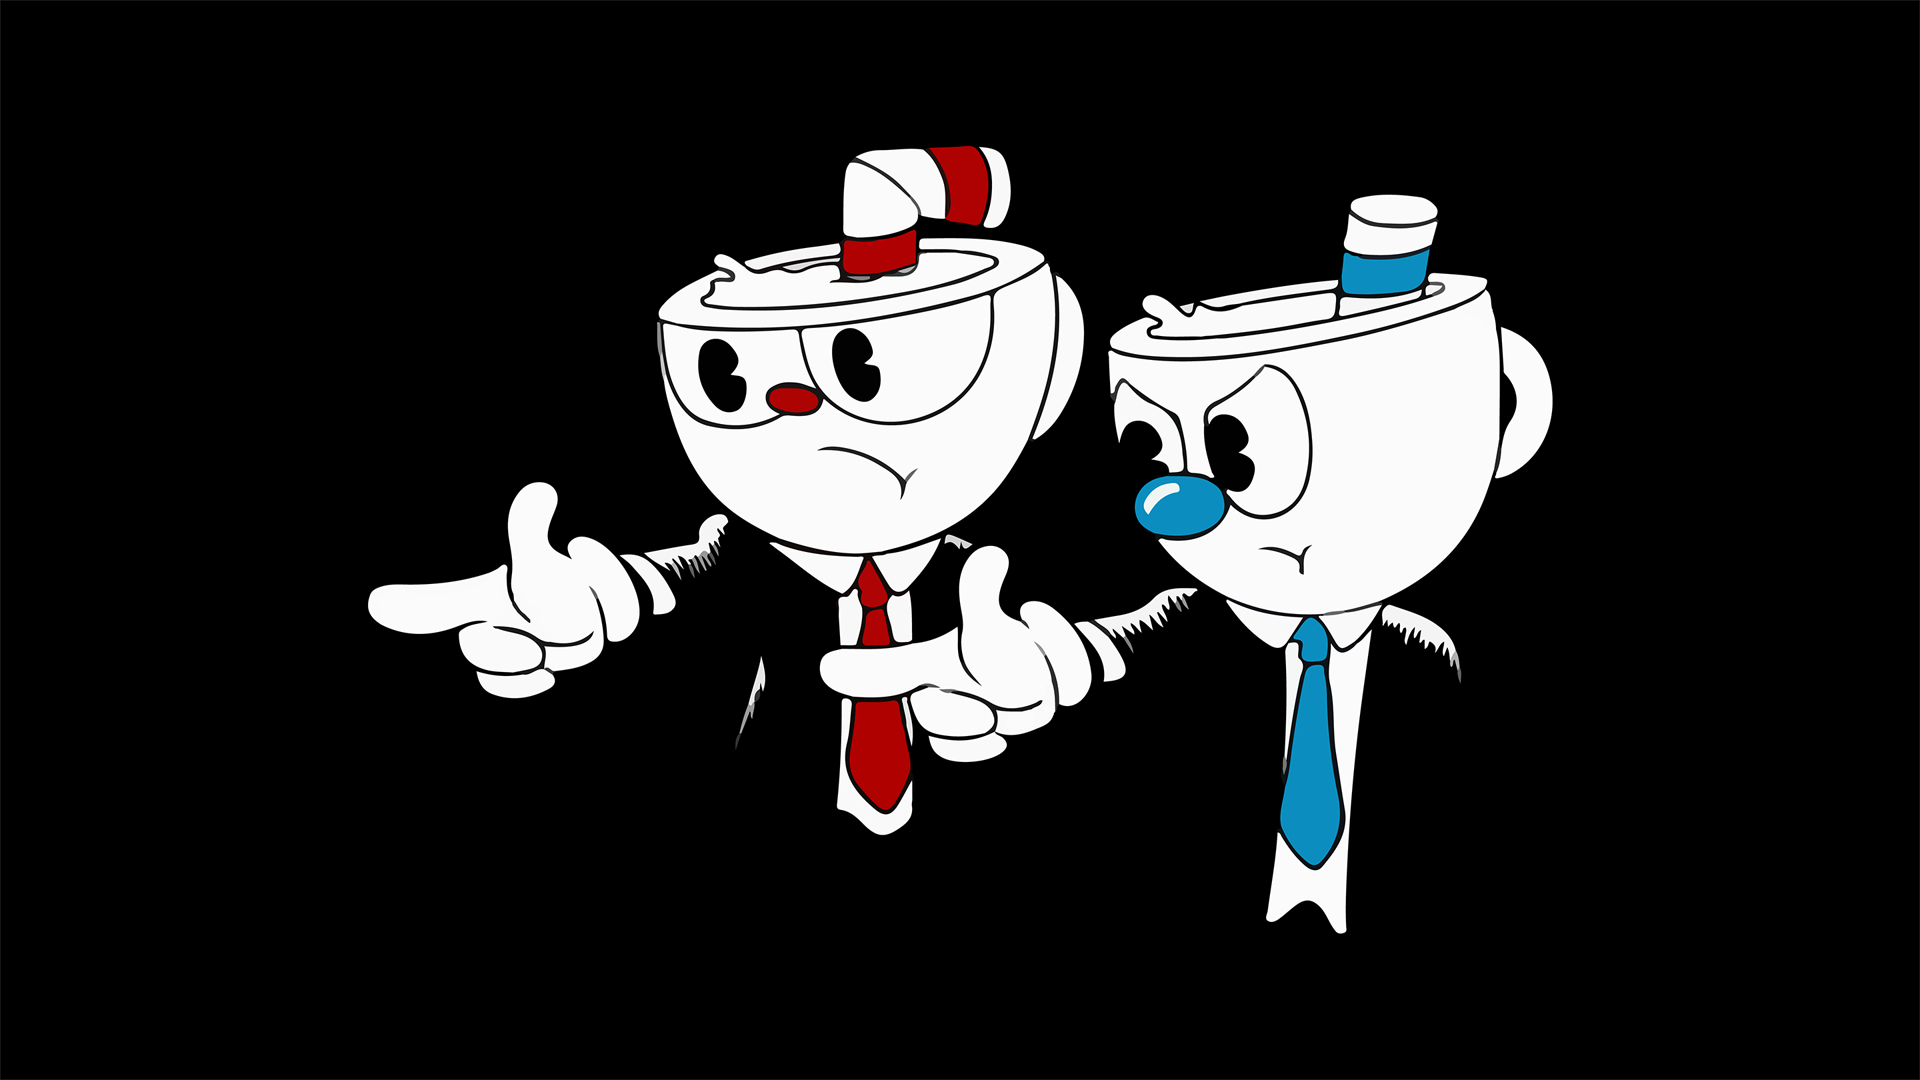 Cuphead Video Game Pulp Fiction Humor Crossover Mash Ups Black Background Black 1920x1080